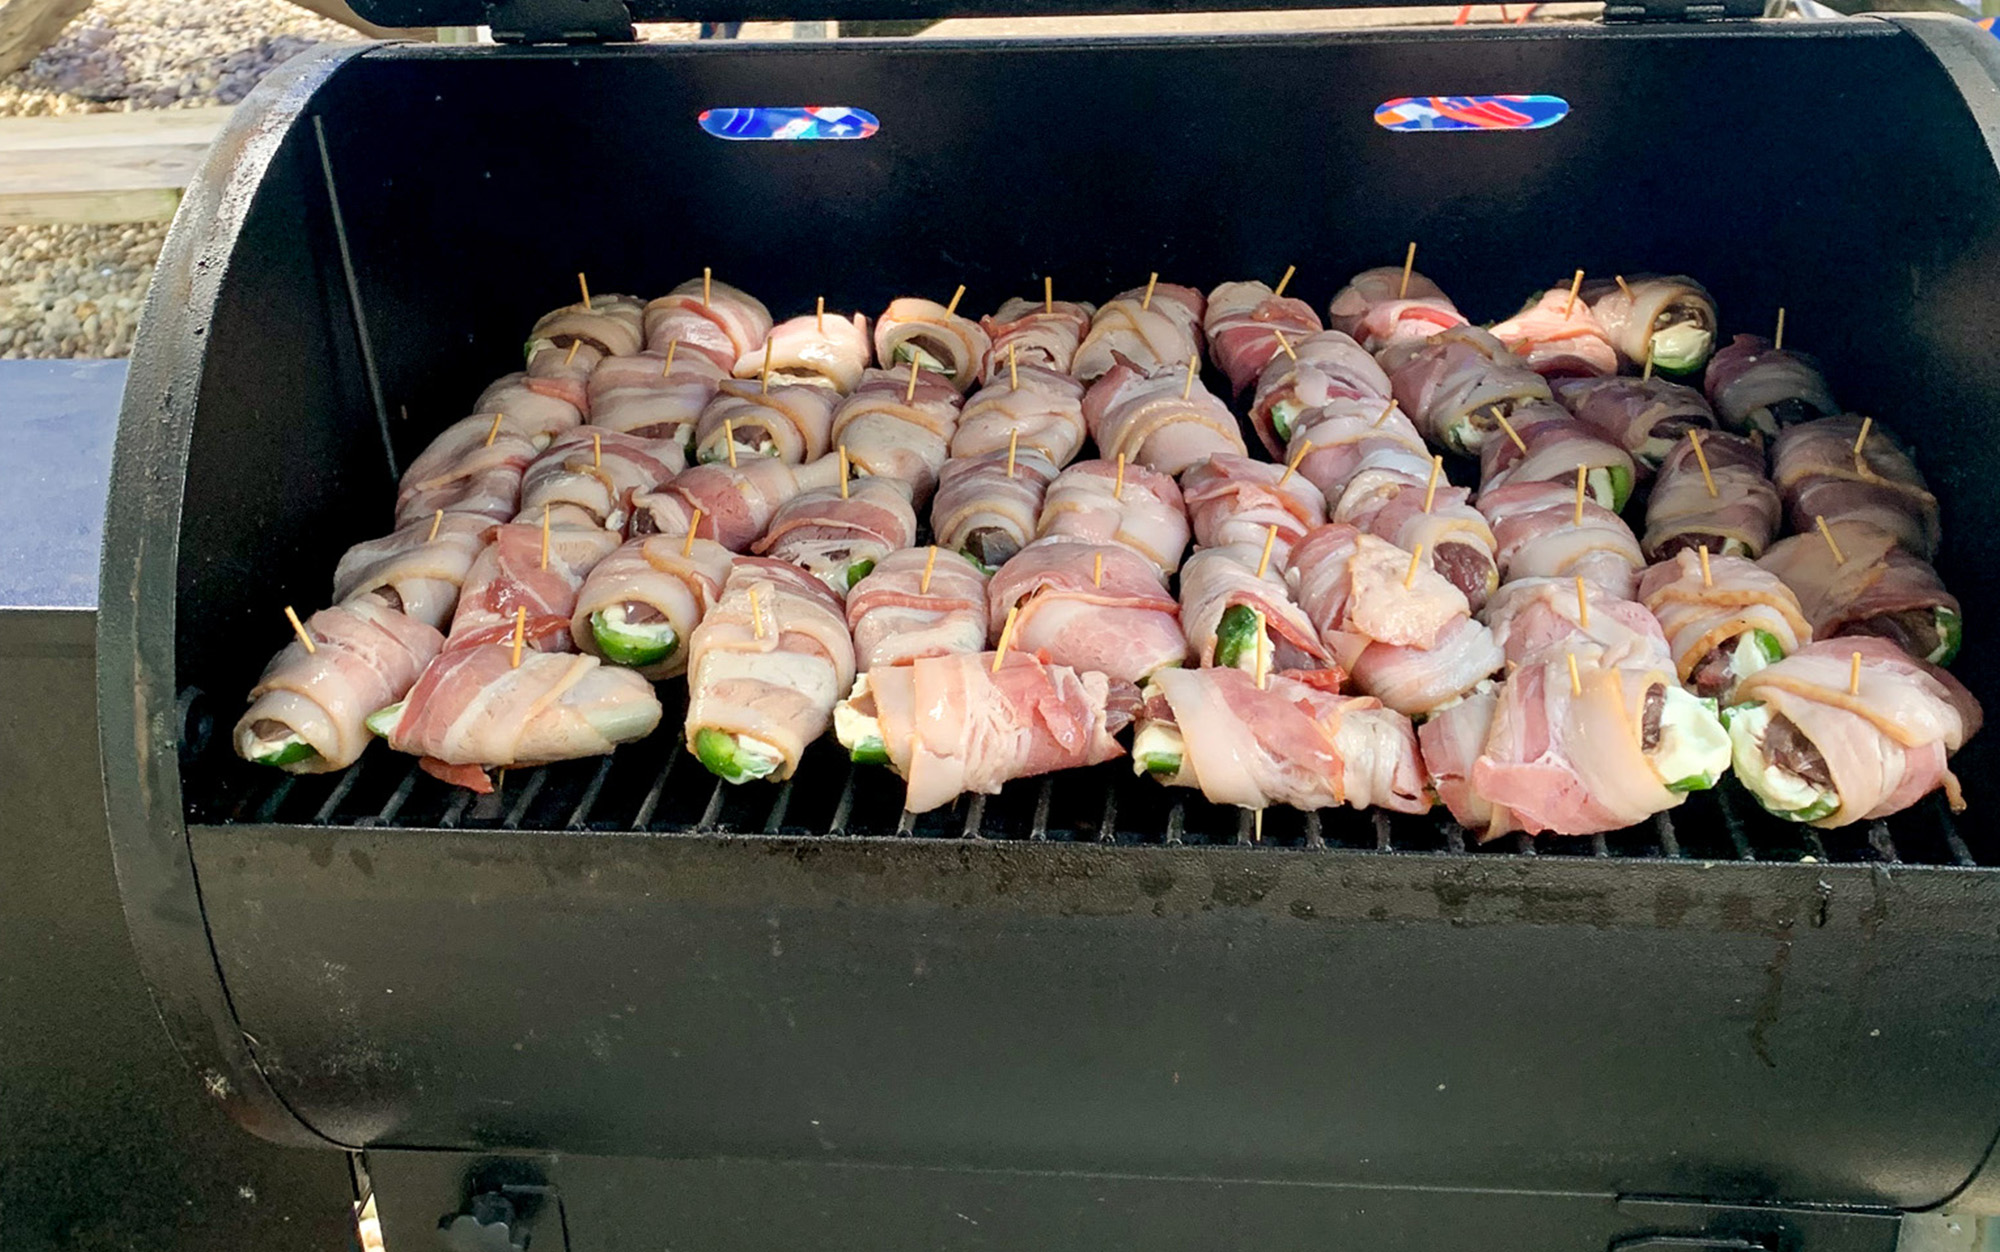 The Traeger Tailgater 20 is great for dishing out tons of dove poppers on the tailgate.